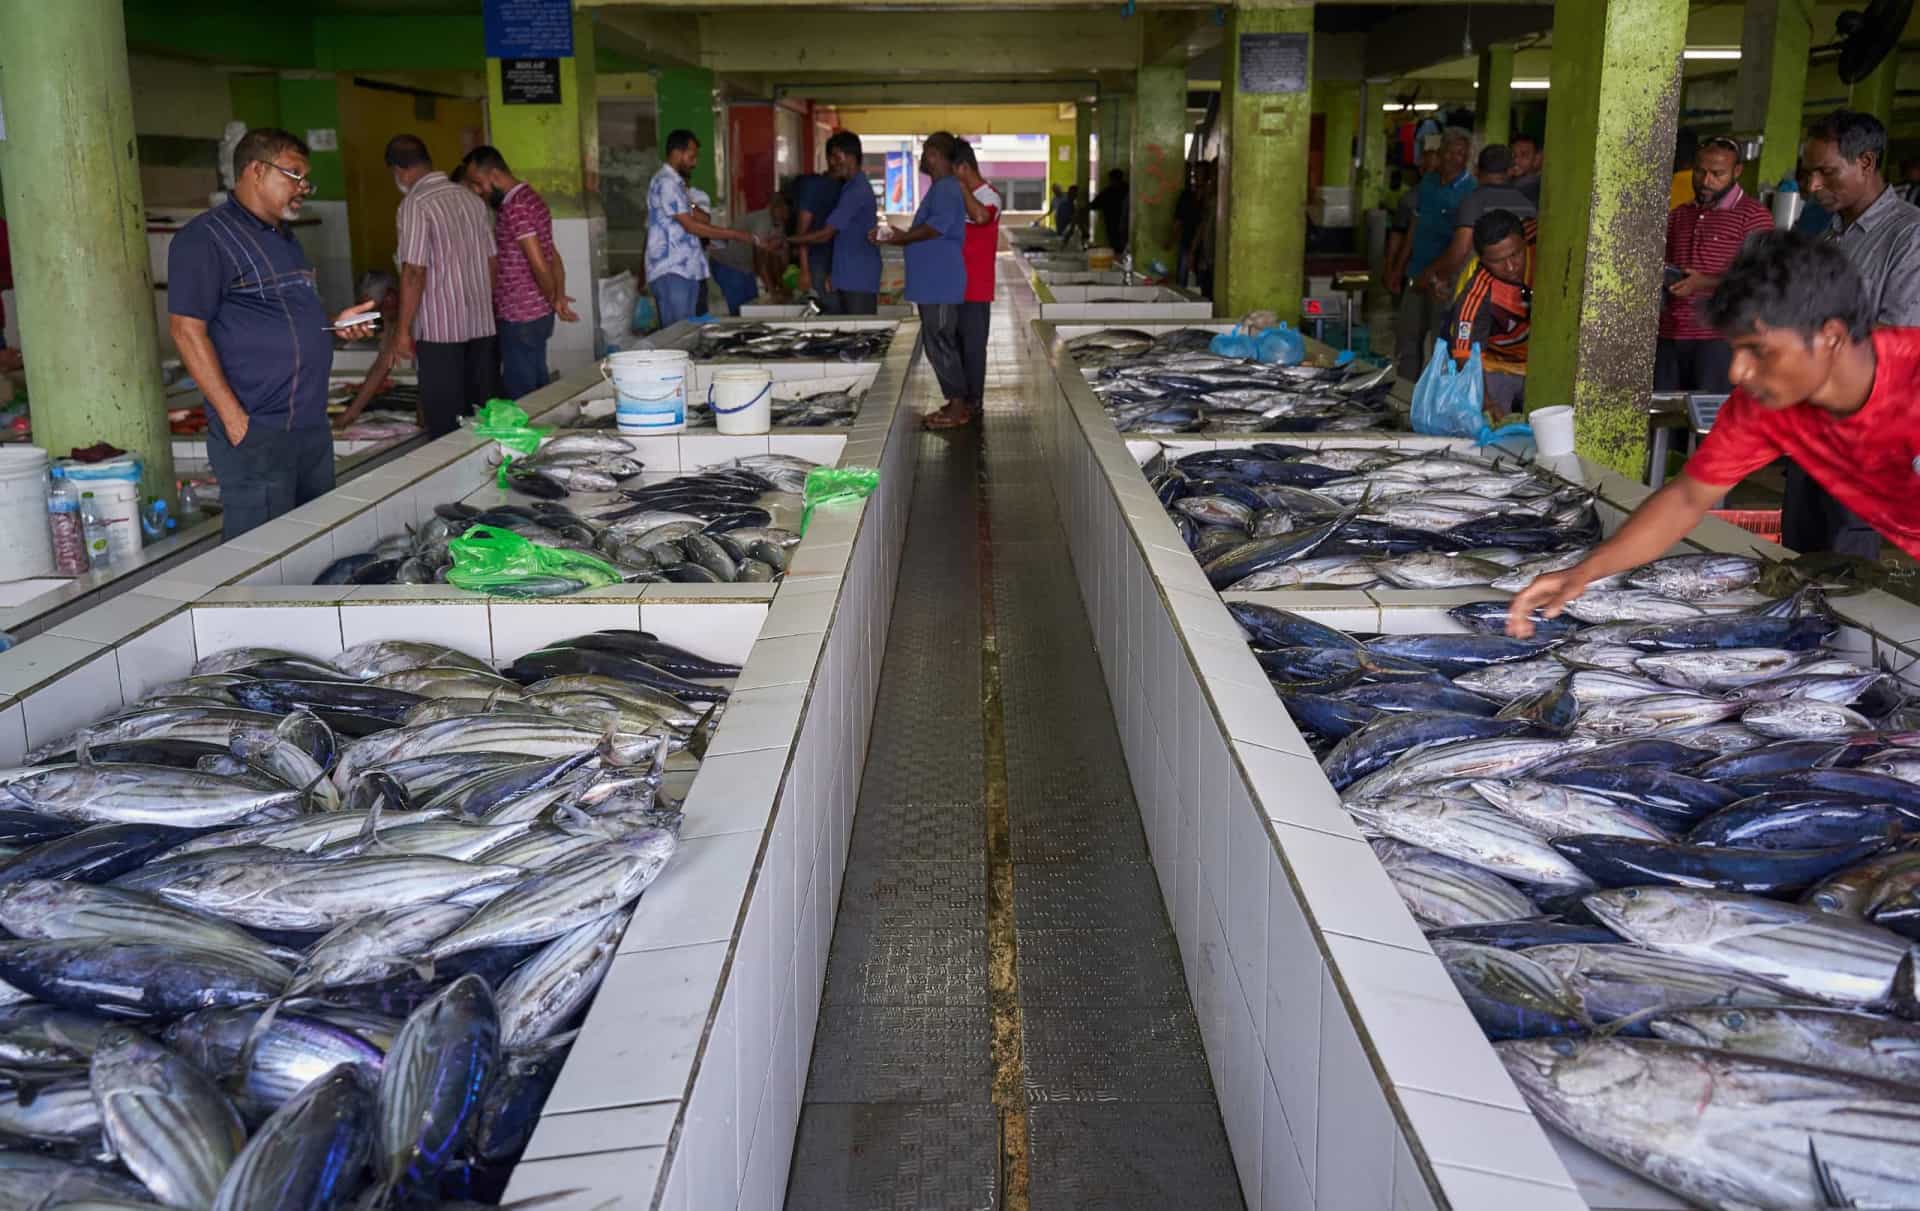 <p>The fishing industry is thriving in the Maldives, and there is no better place to see the spread than at the market. Here you'll find locals selling freshly-caught tuna, wahoo, and barracuda.</p>